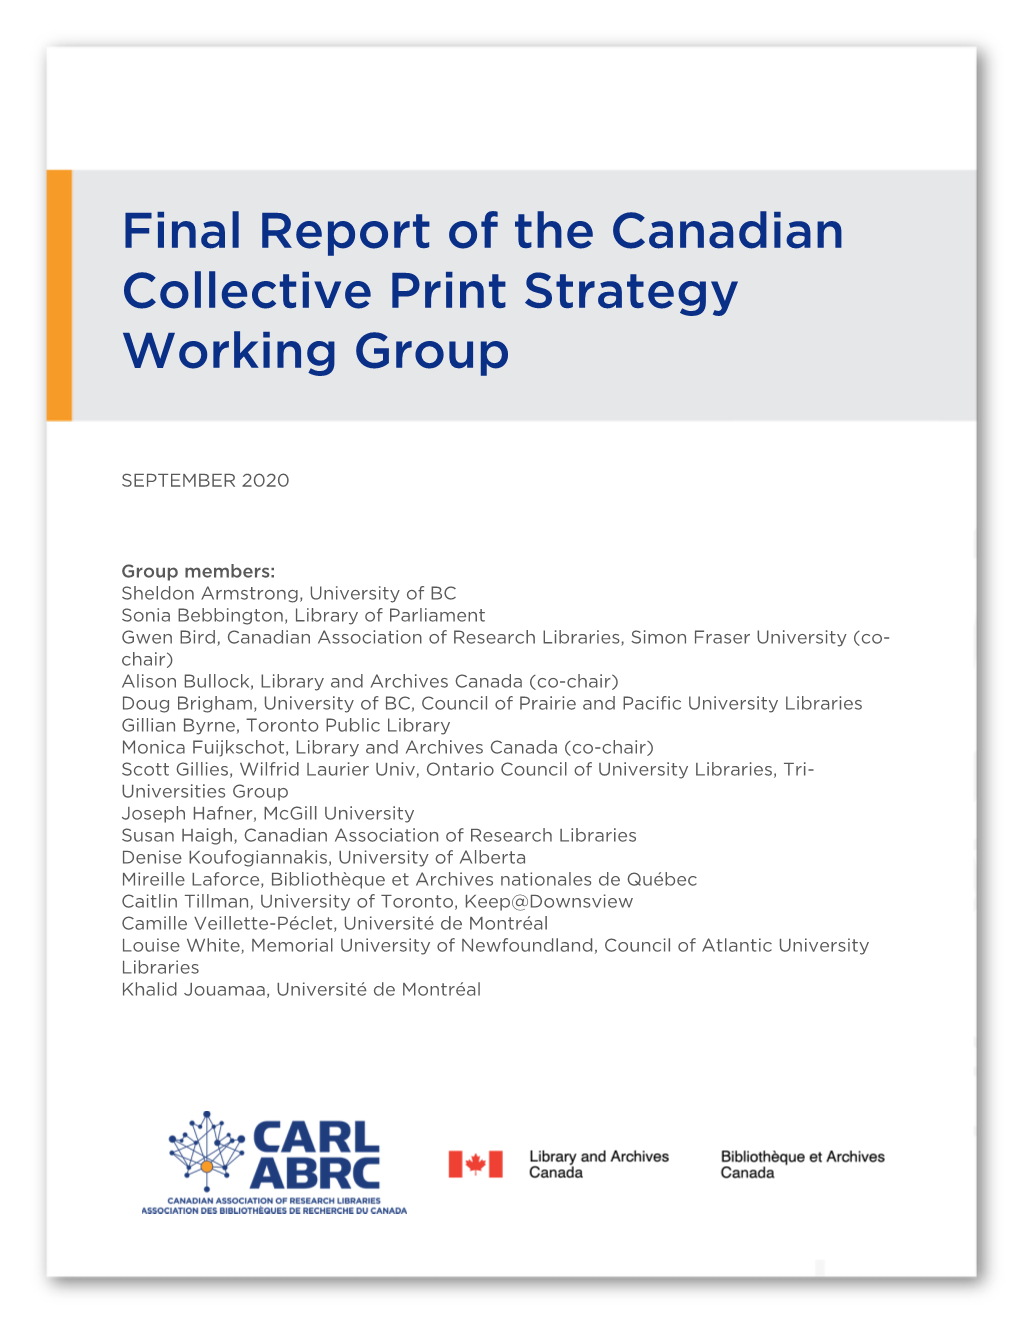 Final Report of the Canadian Collective Print Strategy Working Group